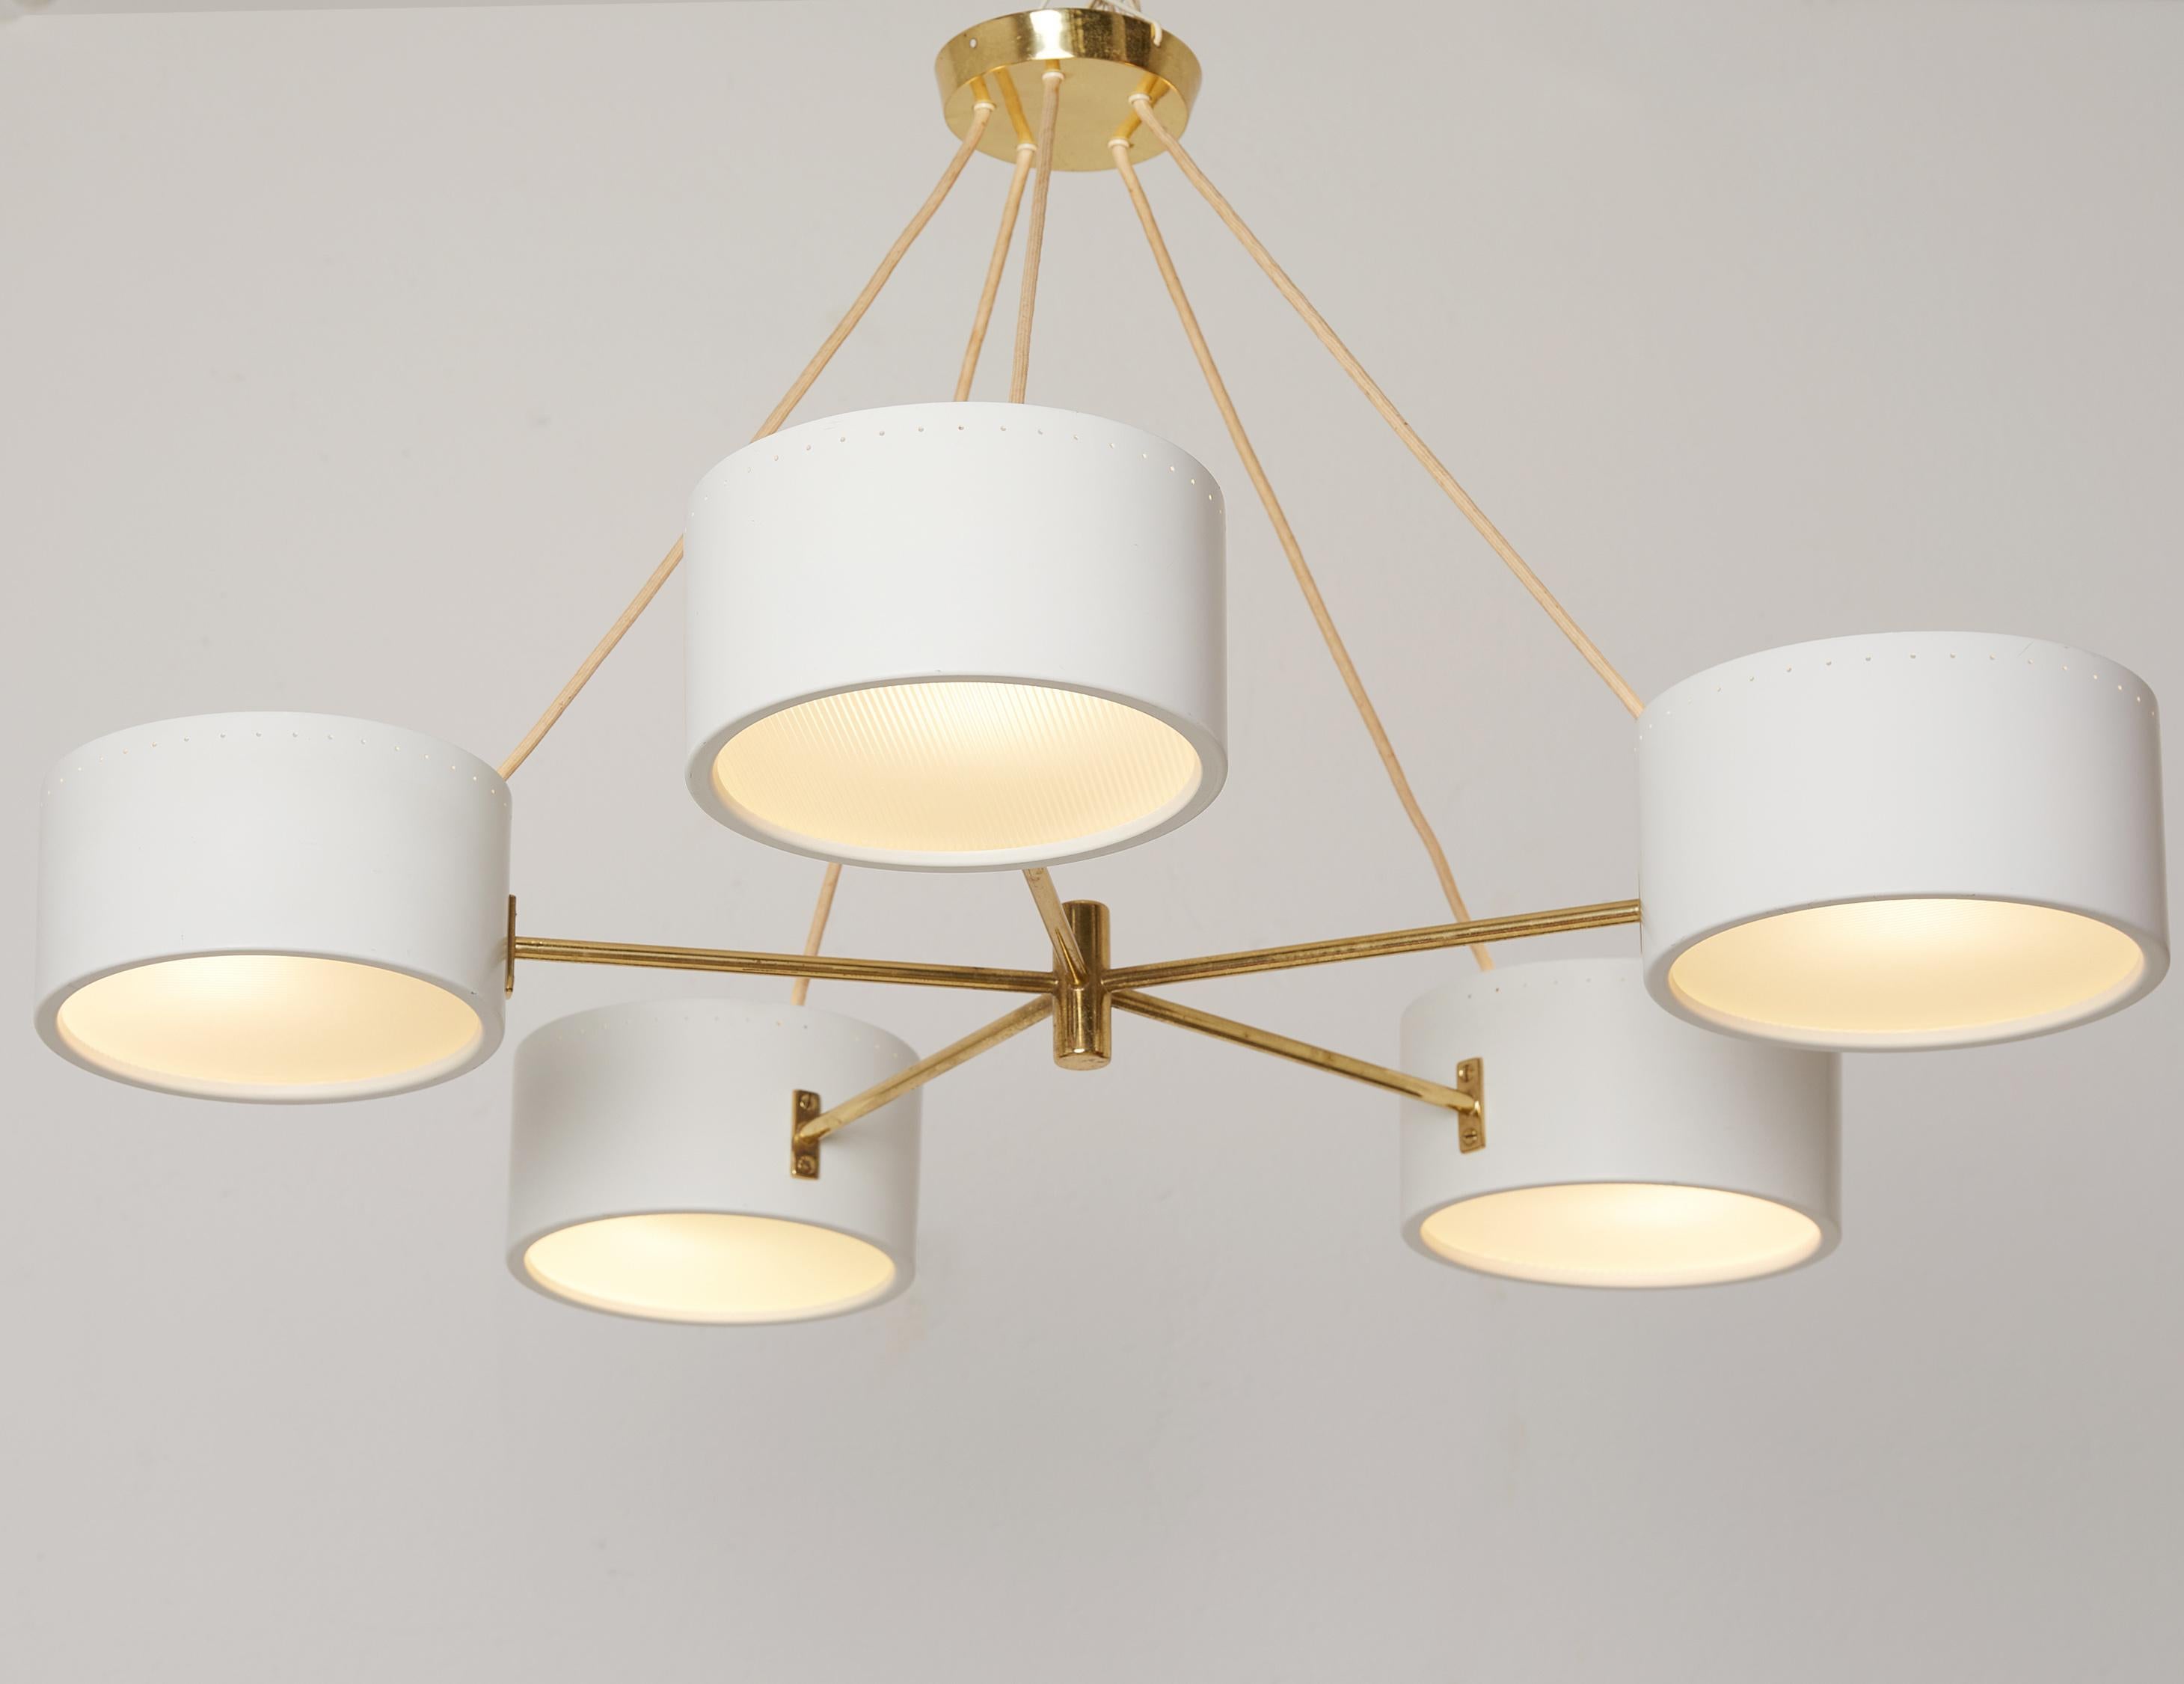 Mid-century gold plated brass chandelier by BAG Turgi Switzerland around 1950

Circular structure with five arms in massive gold plated brass. 
Five circular white lacquered reflectors with frosted and embossed glass lens diffusers which produce